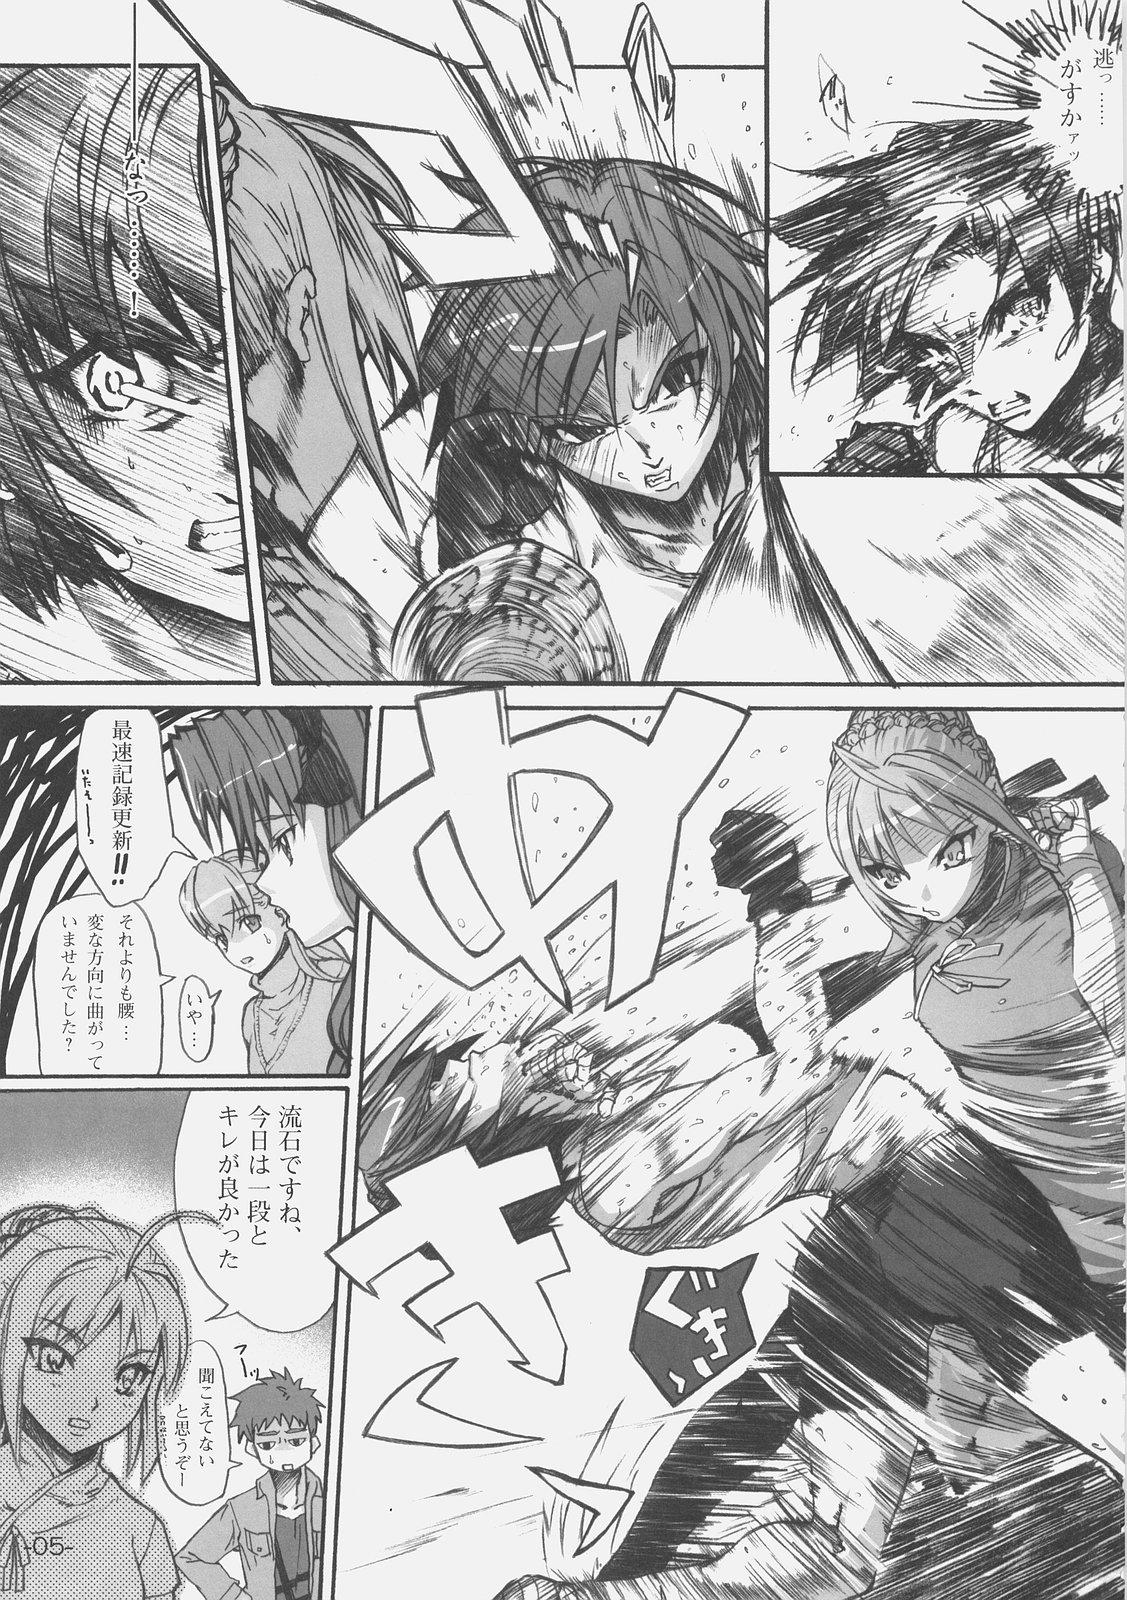 Bisex FIRSTBLOOD - Fate stay night Fate hollow ataraxia Cutie - Page 7